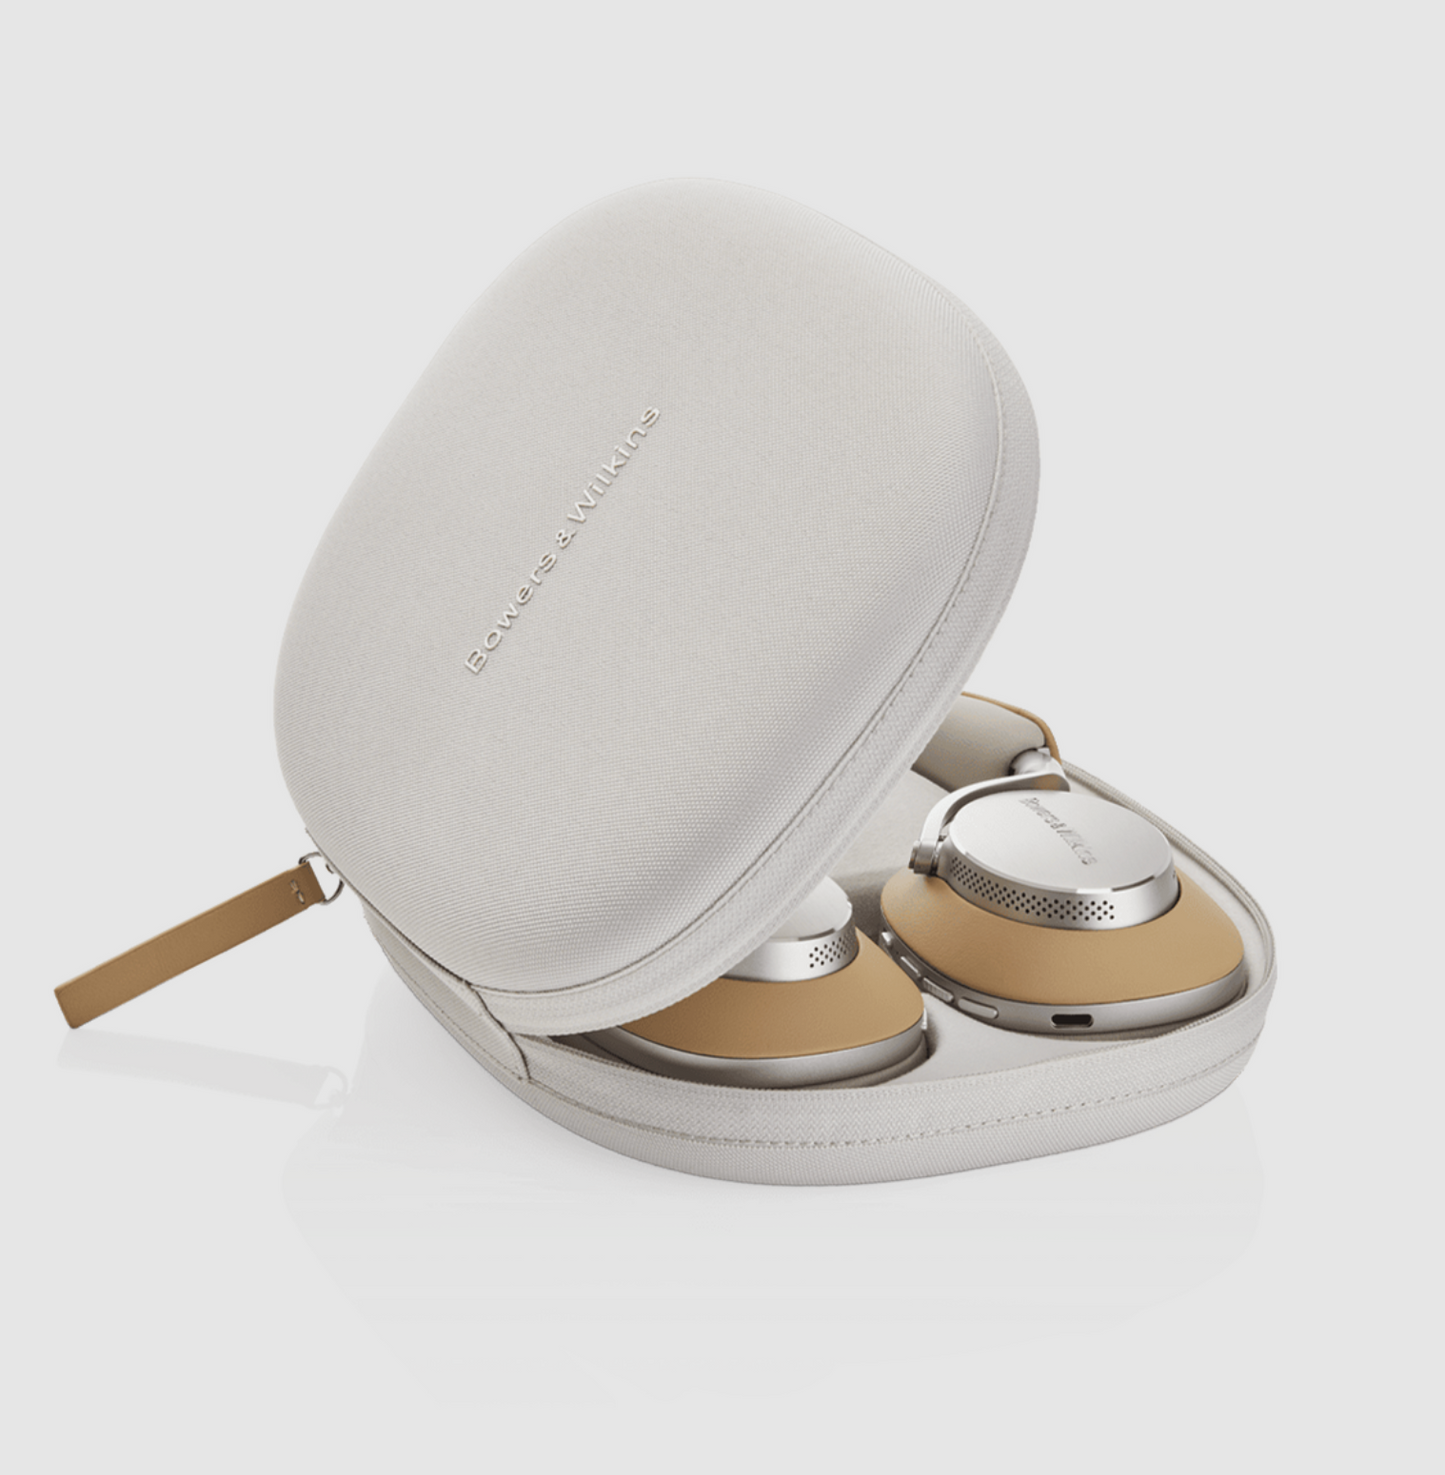 B&W Px8 Noise Cancelling Headphones in Tan. Image of case